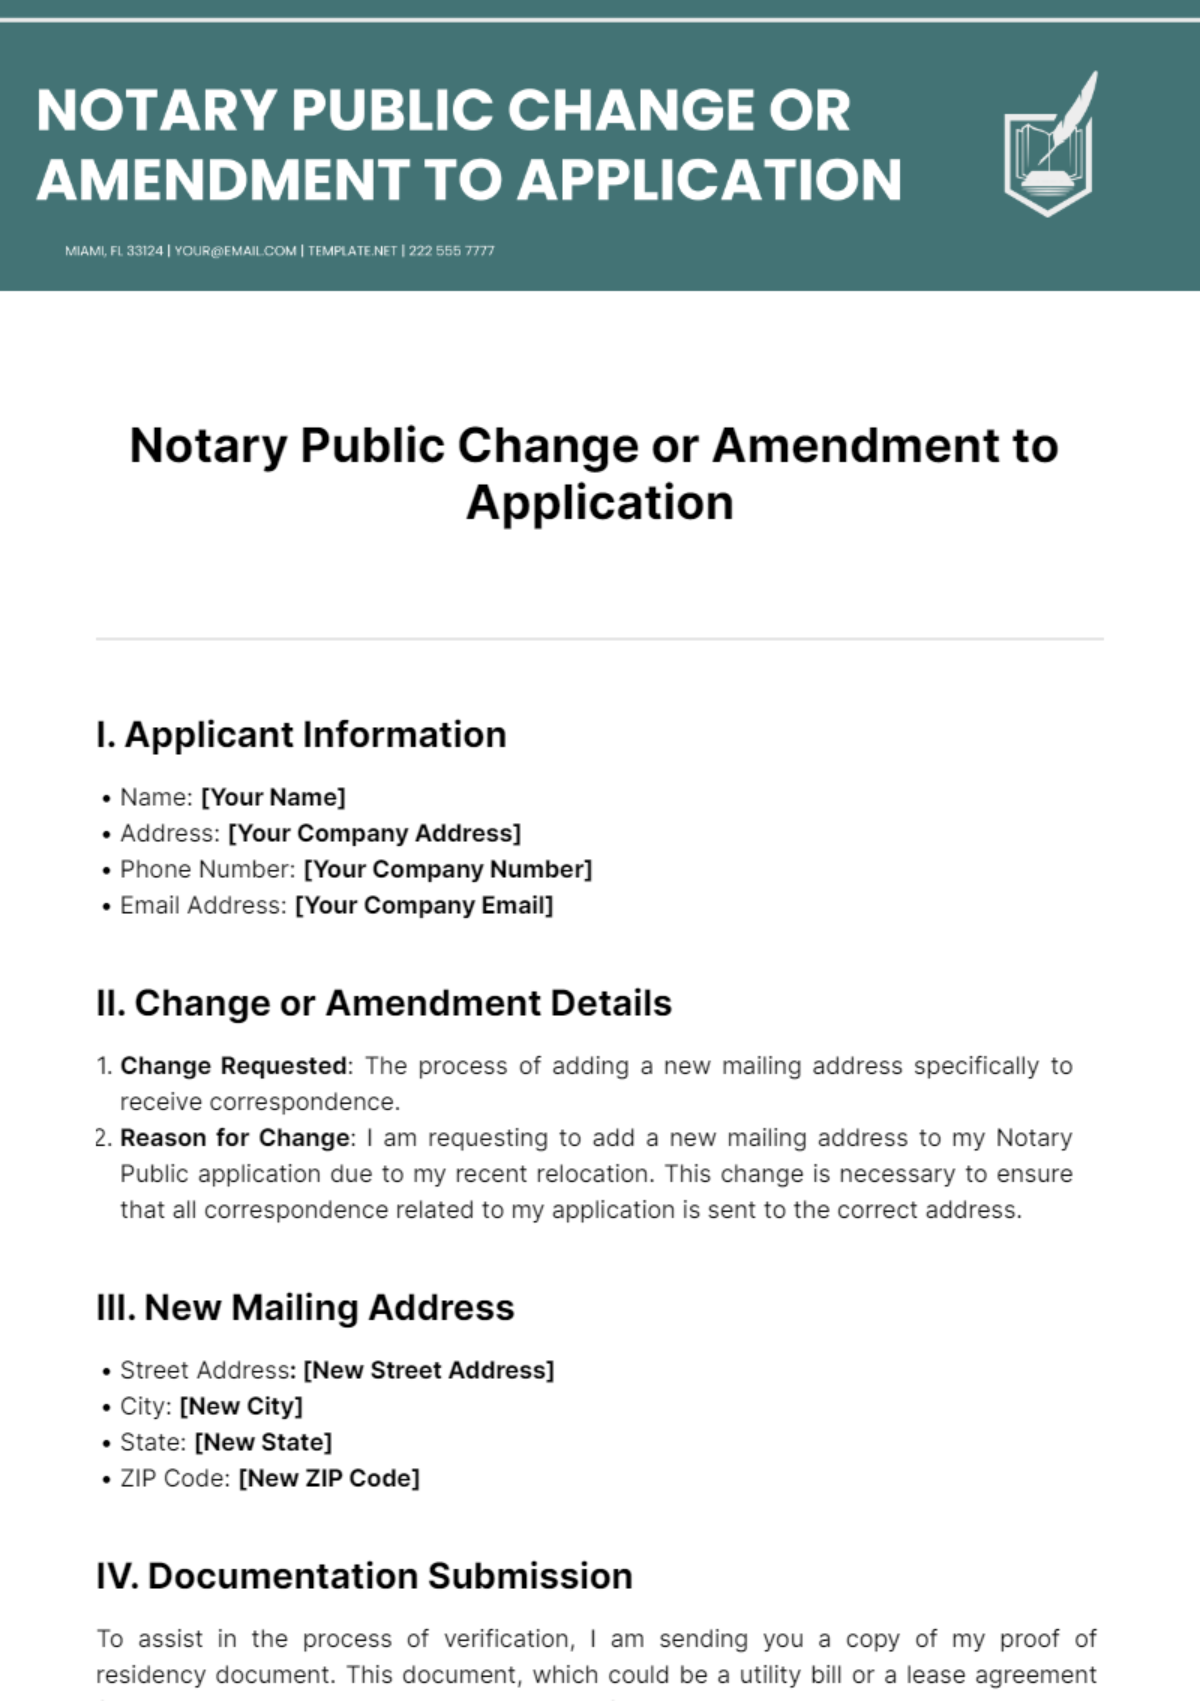 Notary Public Change Or Amendment To Application Template